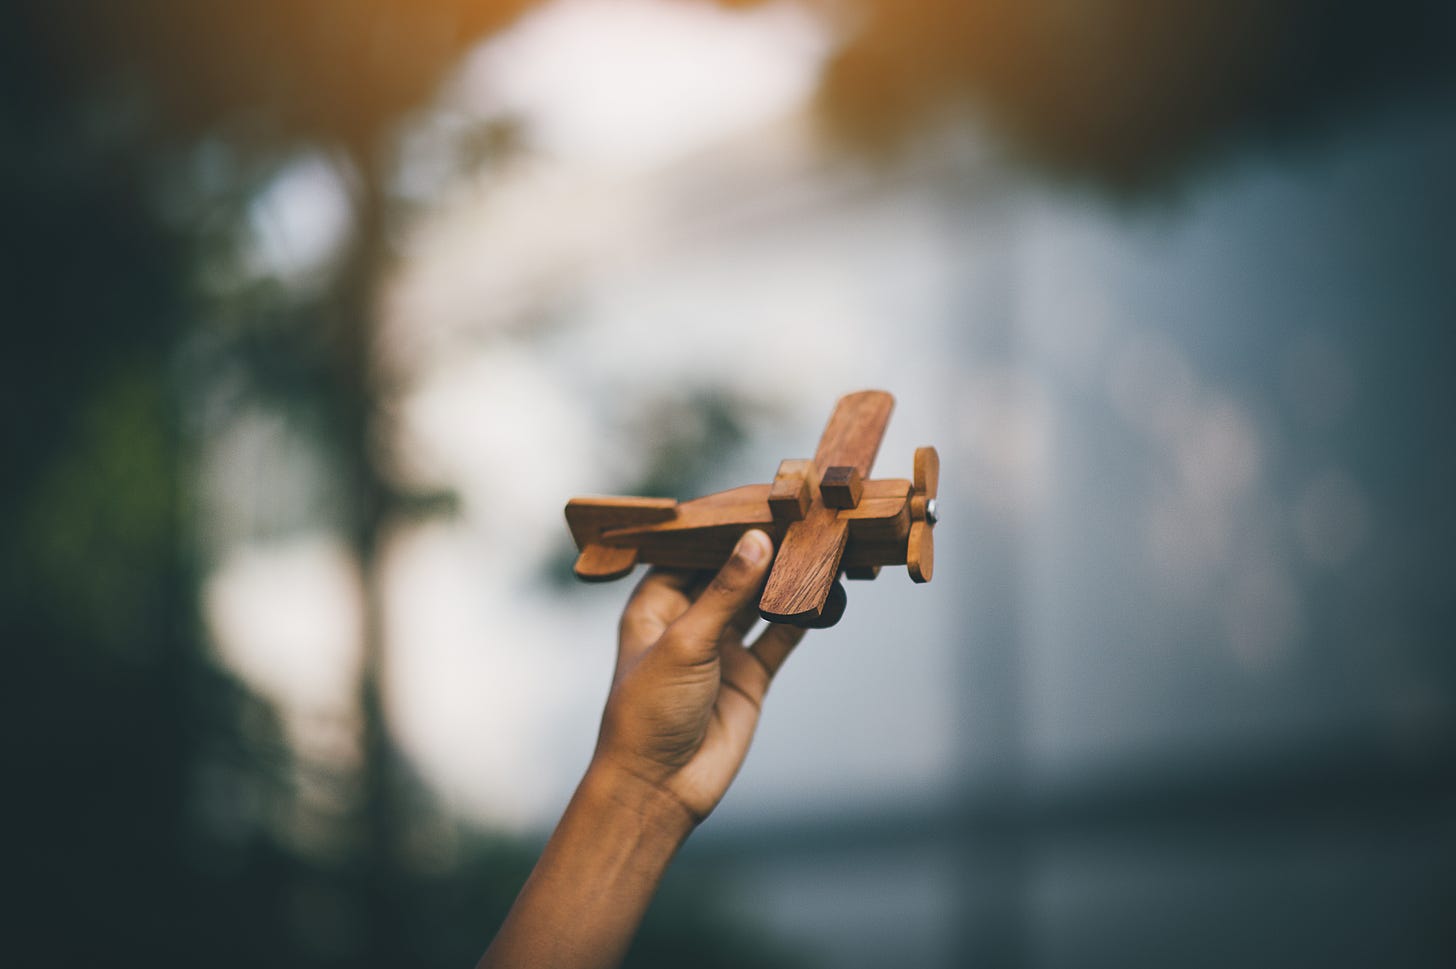 A child's hand holding a very rudimentary toy wooden plane